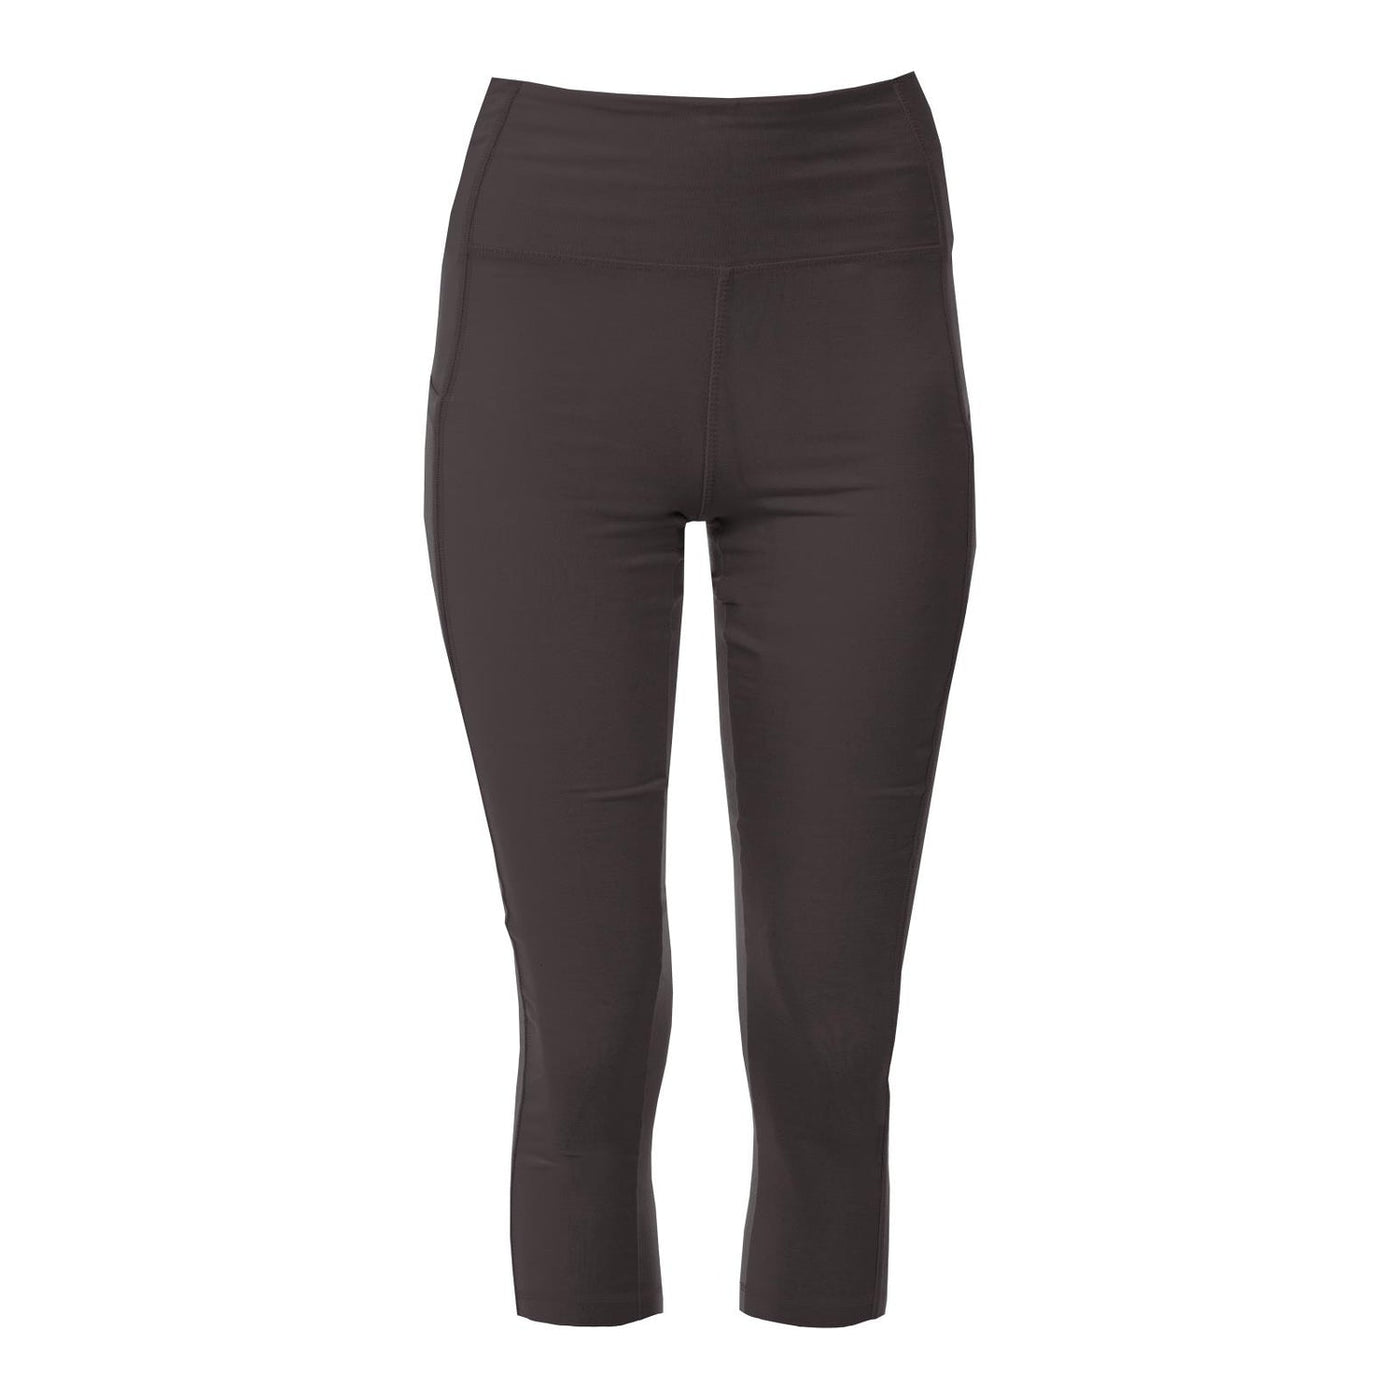 Kickee Pants Women's Luxe Stretch 3/4 Leggings with Pockets: Solid Midnight